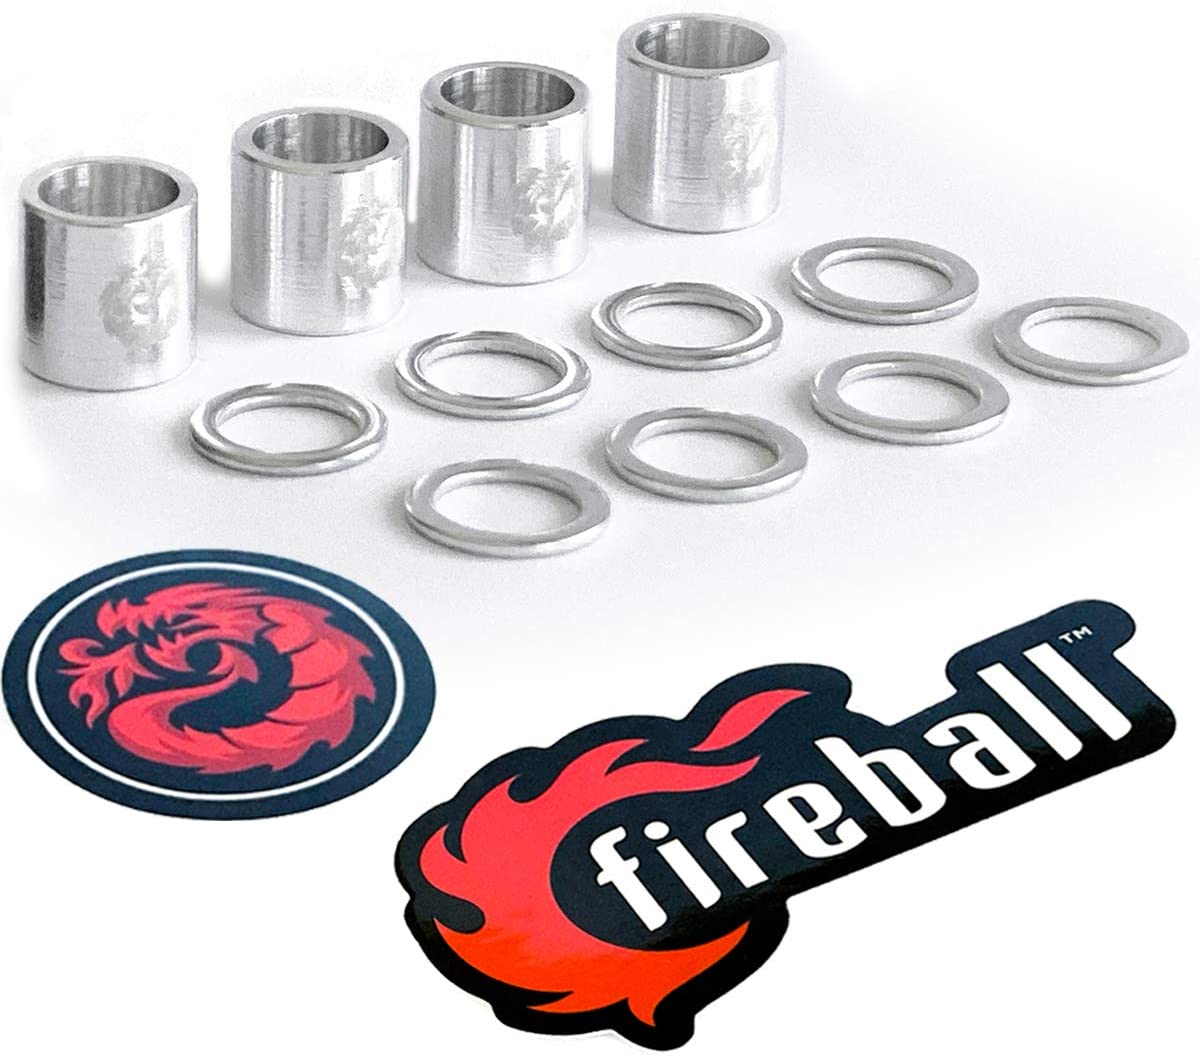 Fireball Dragon Bearing Spacers and Speed Rings, Silver